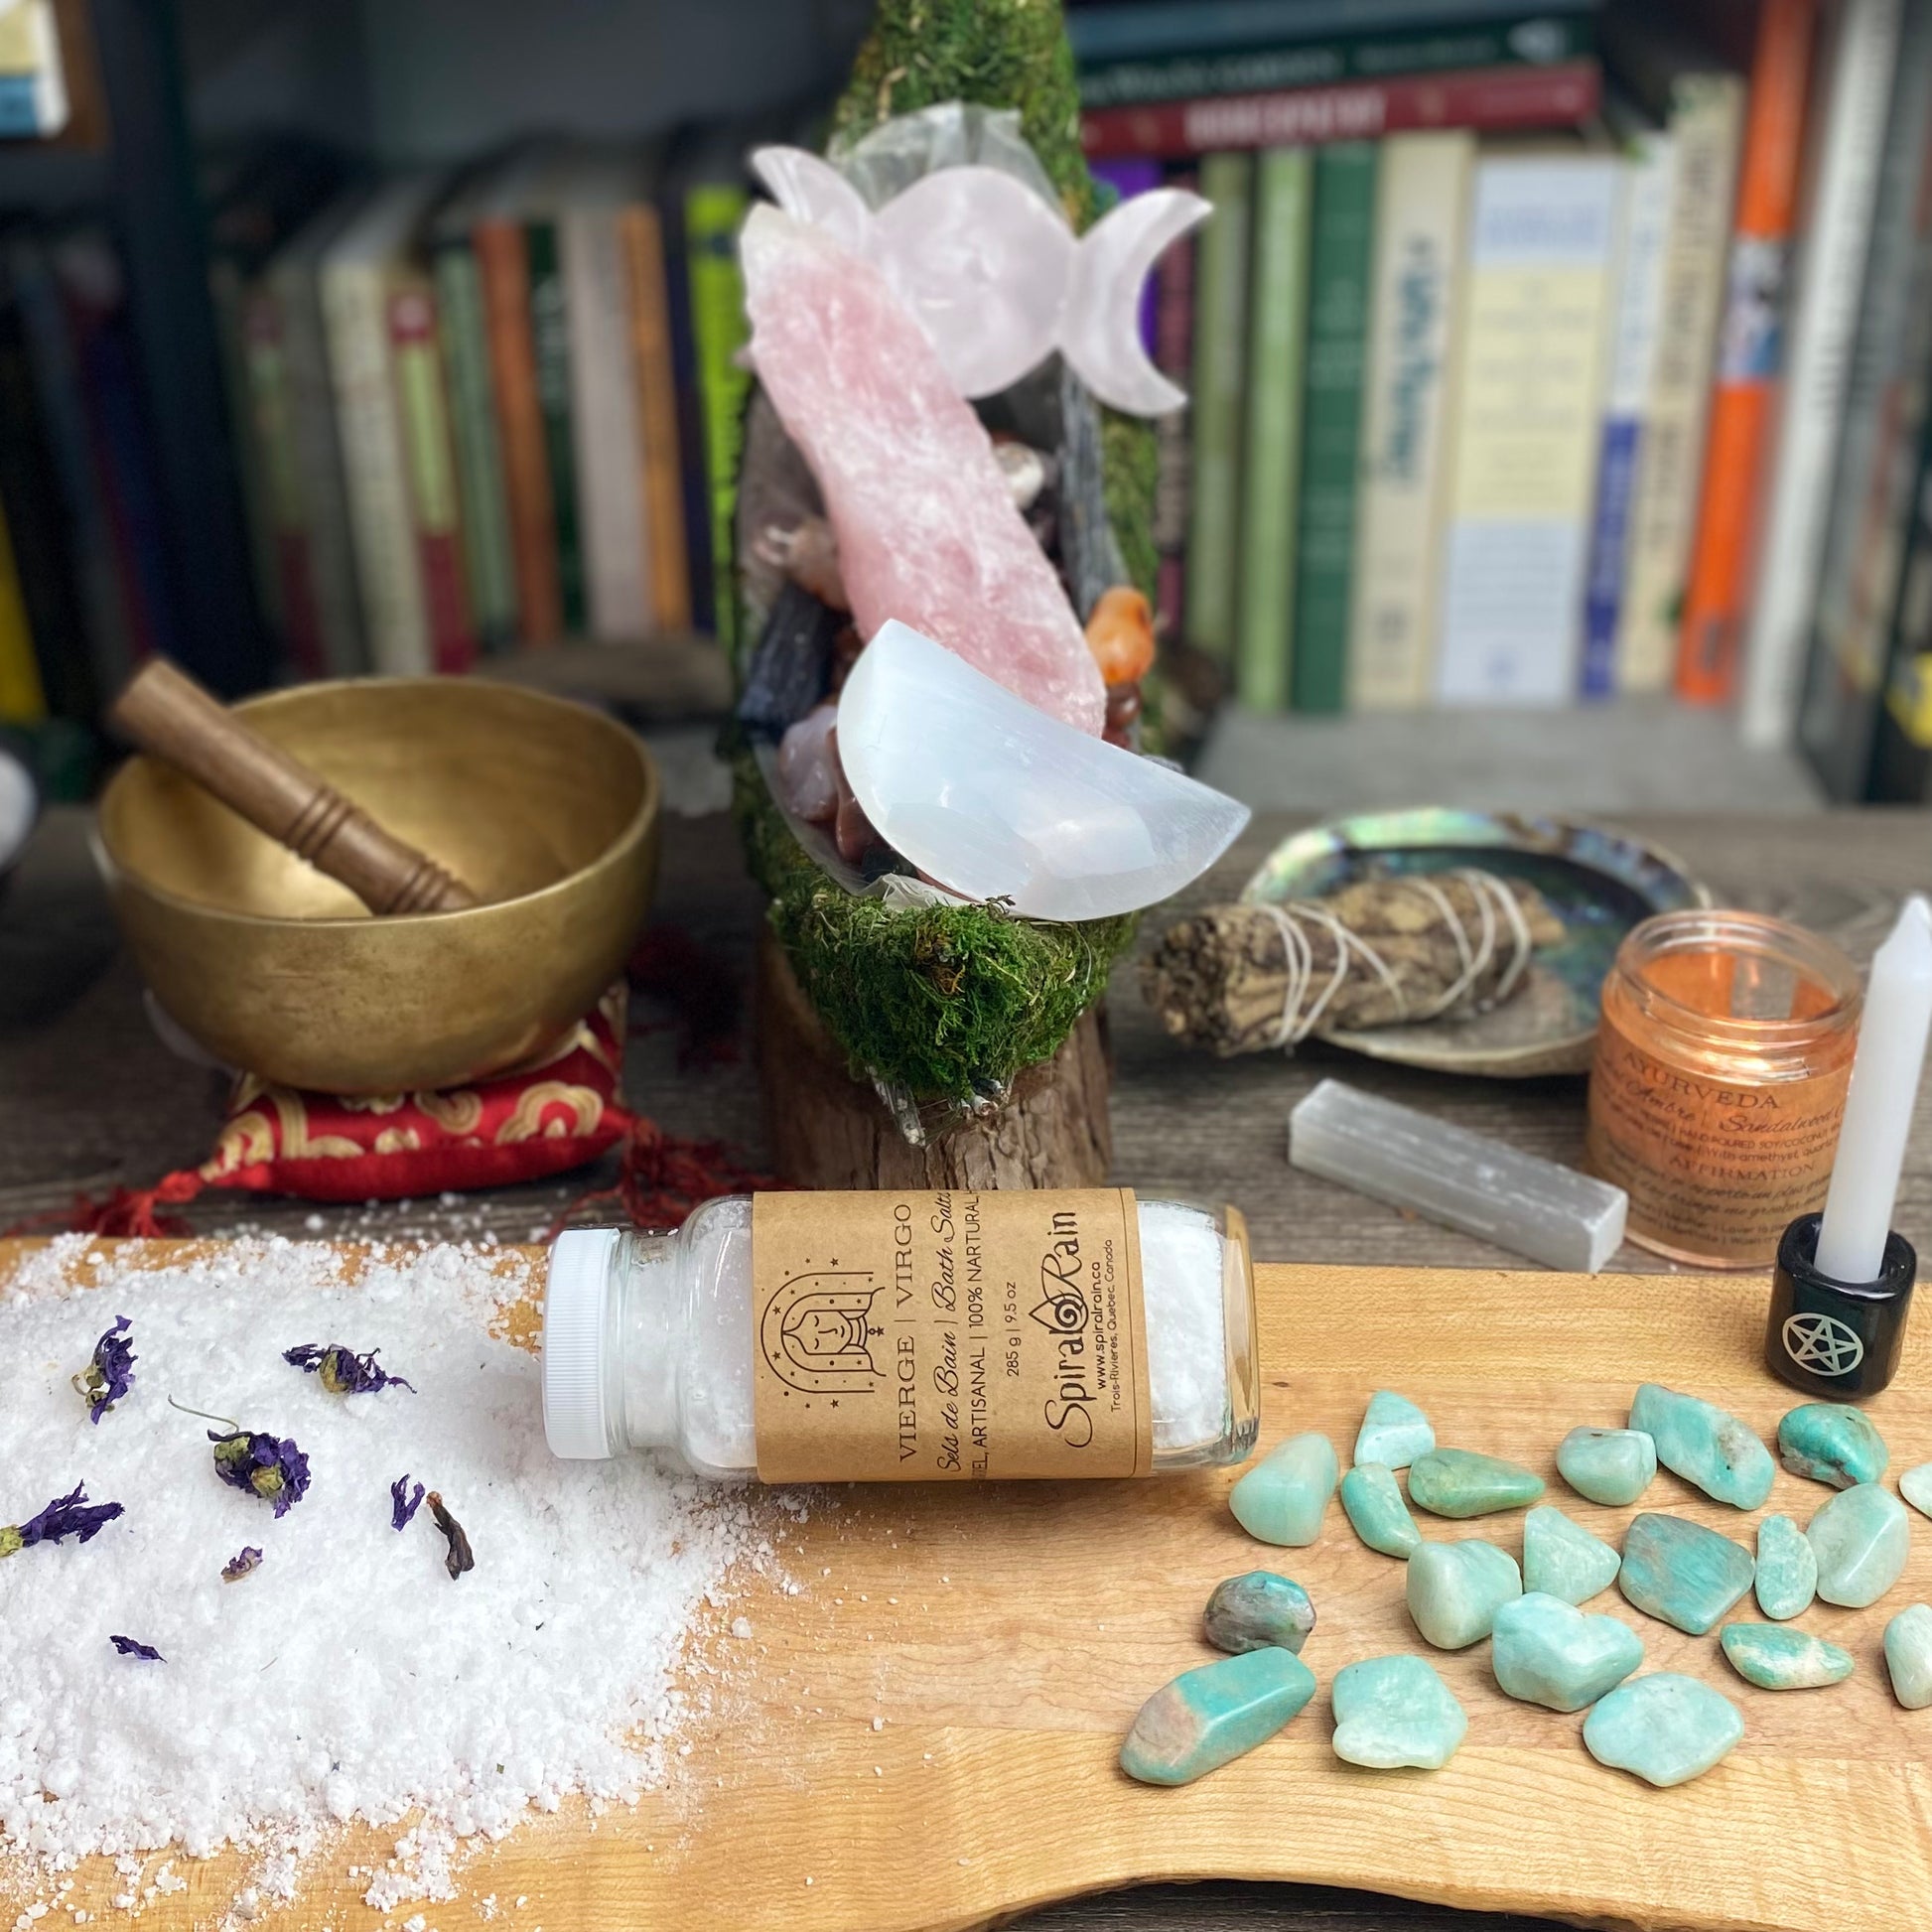 Virgo (Aug 23 - Sep 22) bath salts at $20 only from Spiral Rain